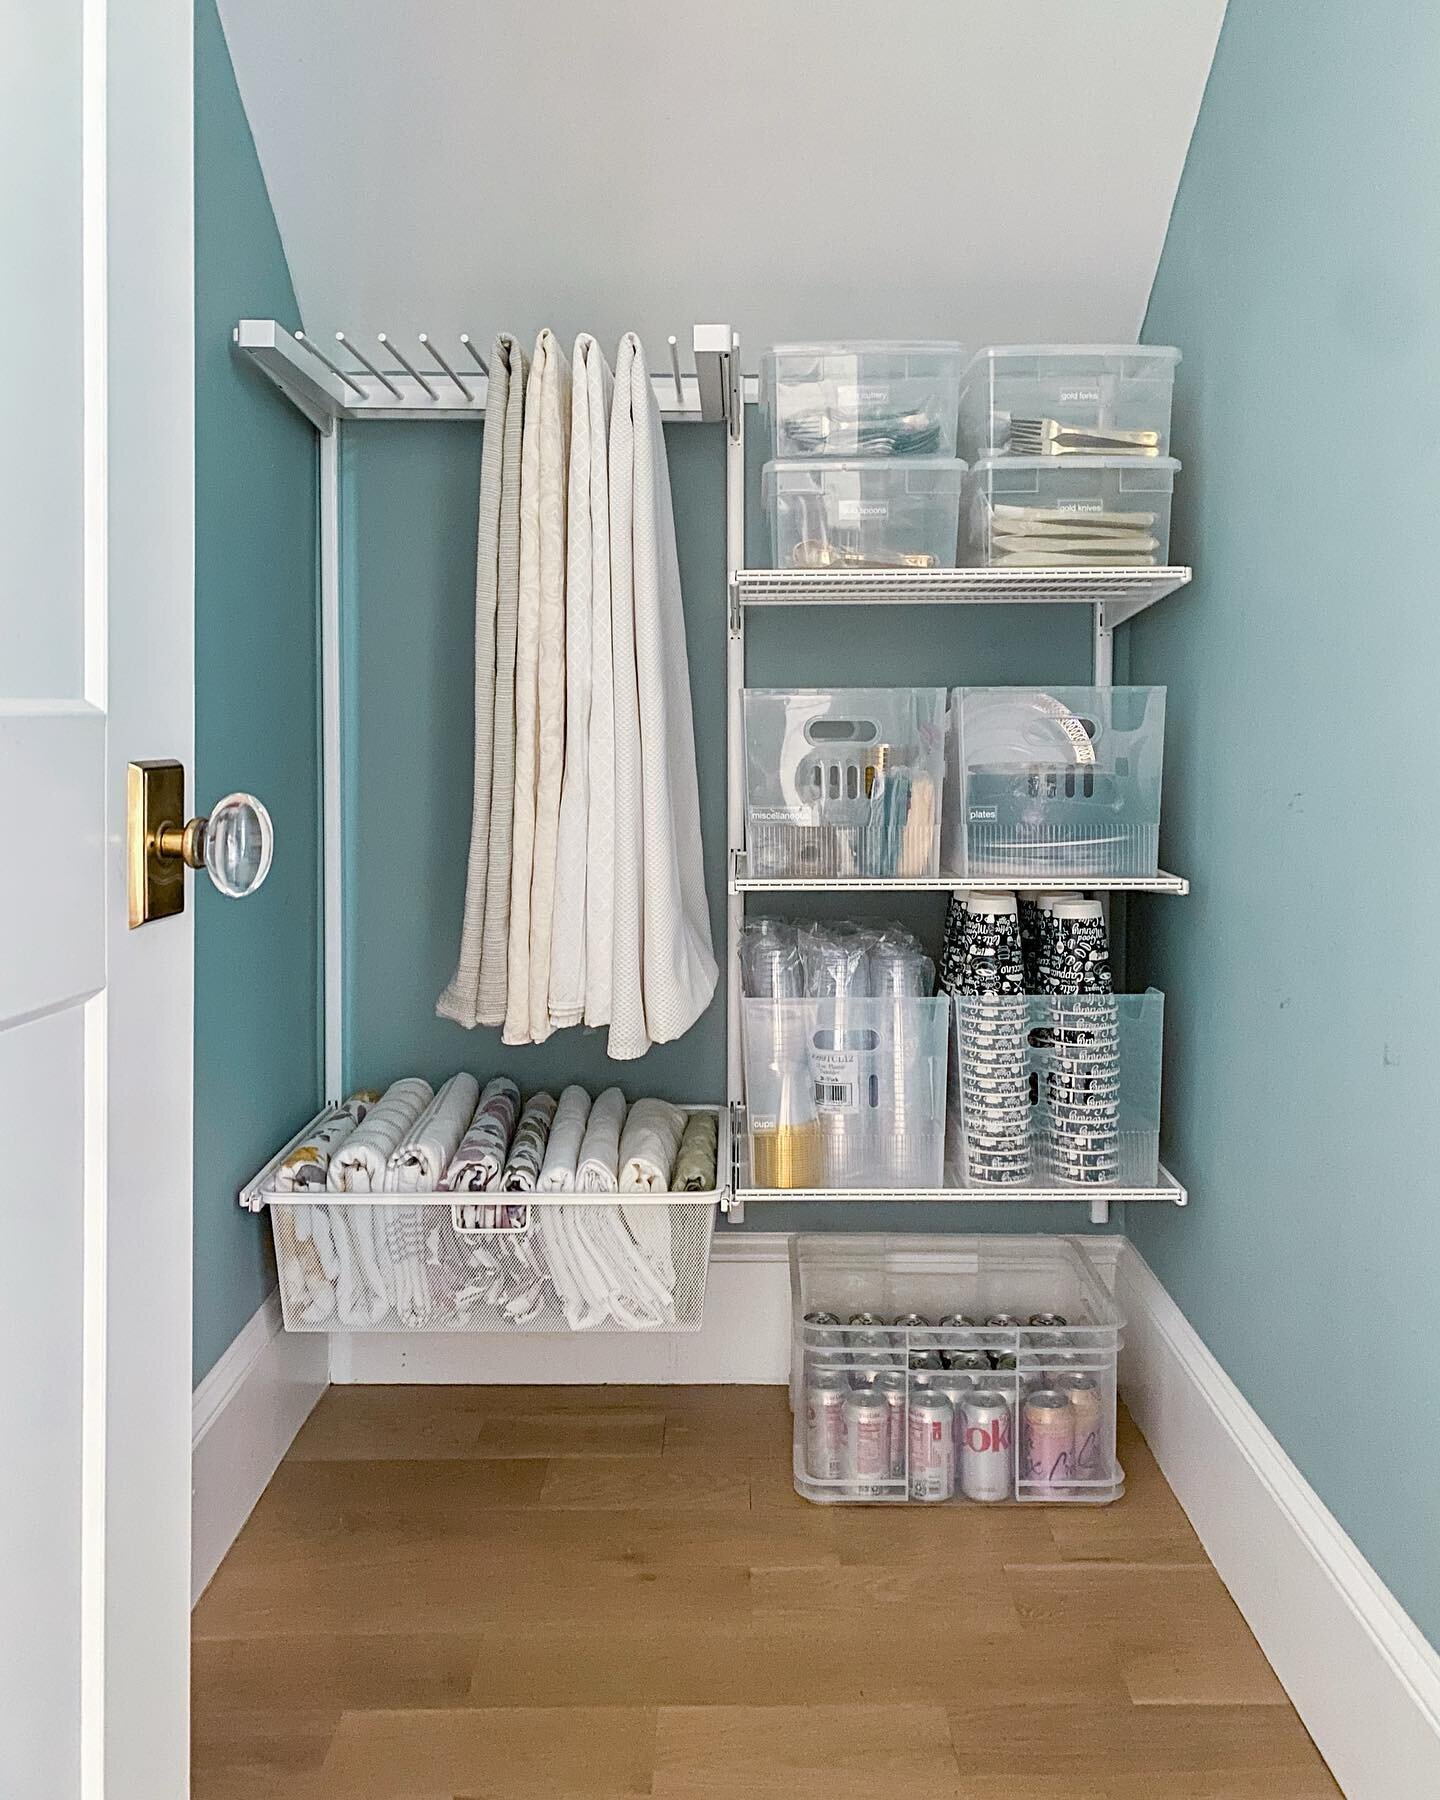 There is nothing better than a multi-functional organizing product, and I am especially loving this pants rack turned tablecloth organizer 😍.
&bull;
&bull;
&bull;
#butlerpantry #elfacloset #organization